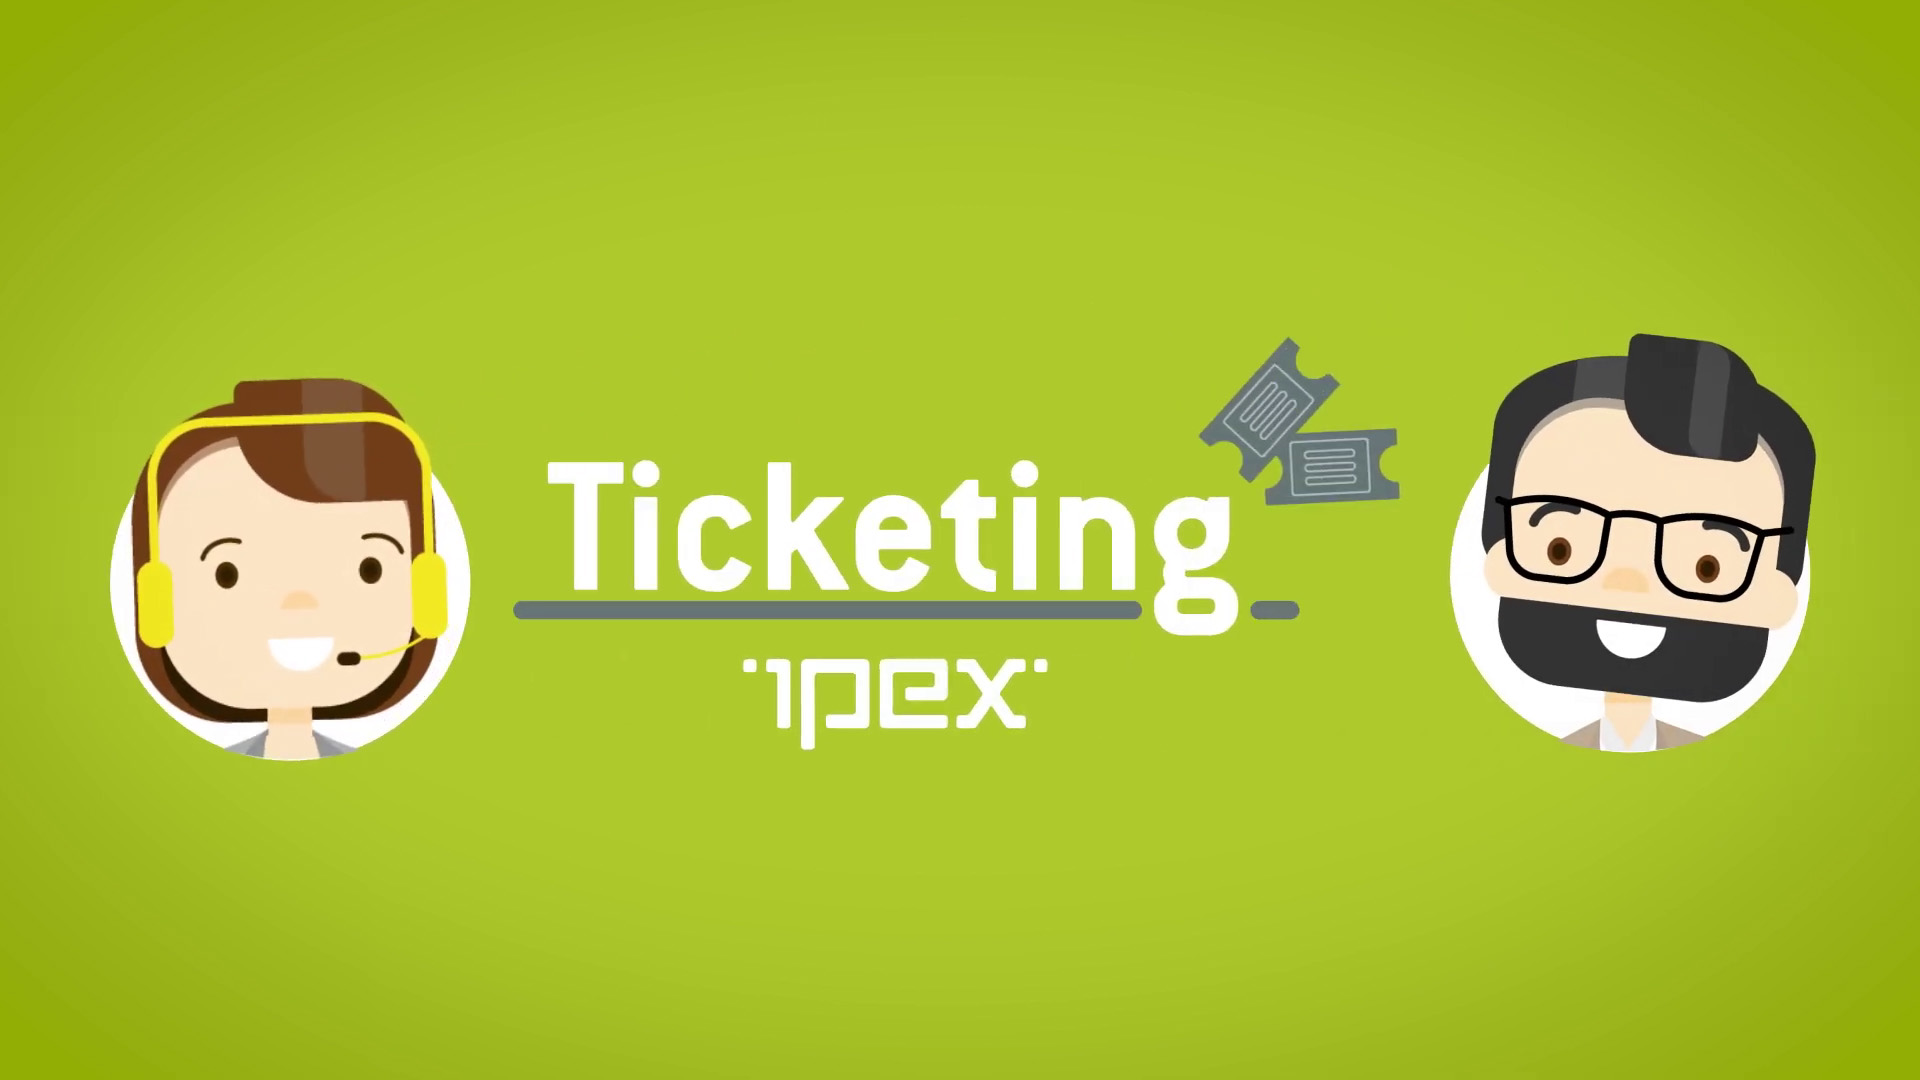 IPEX - Ad for Ticketing service